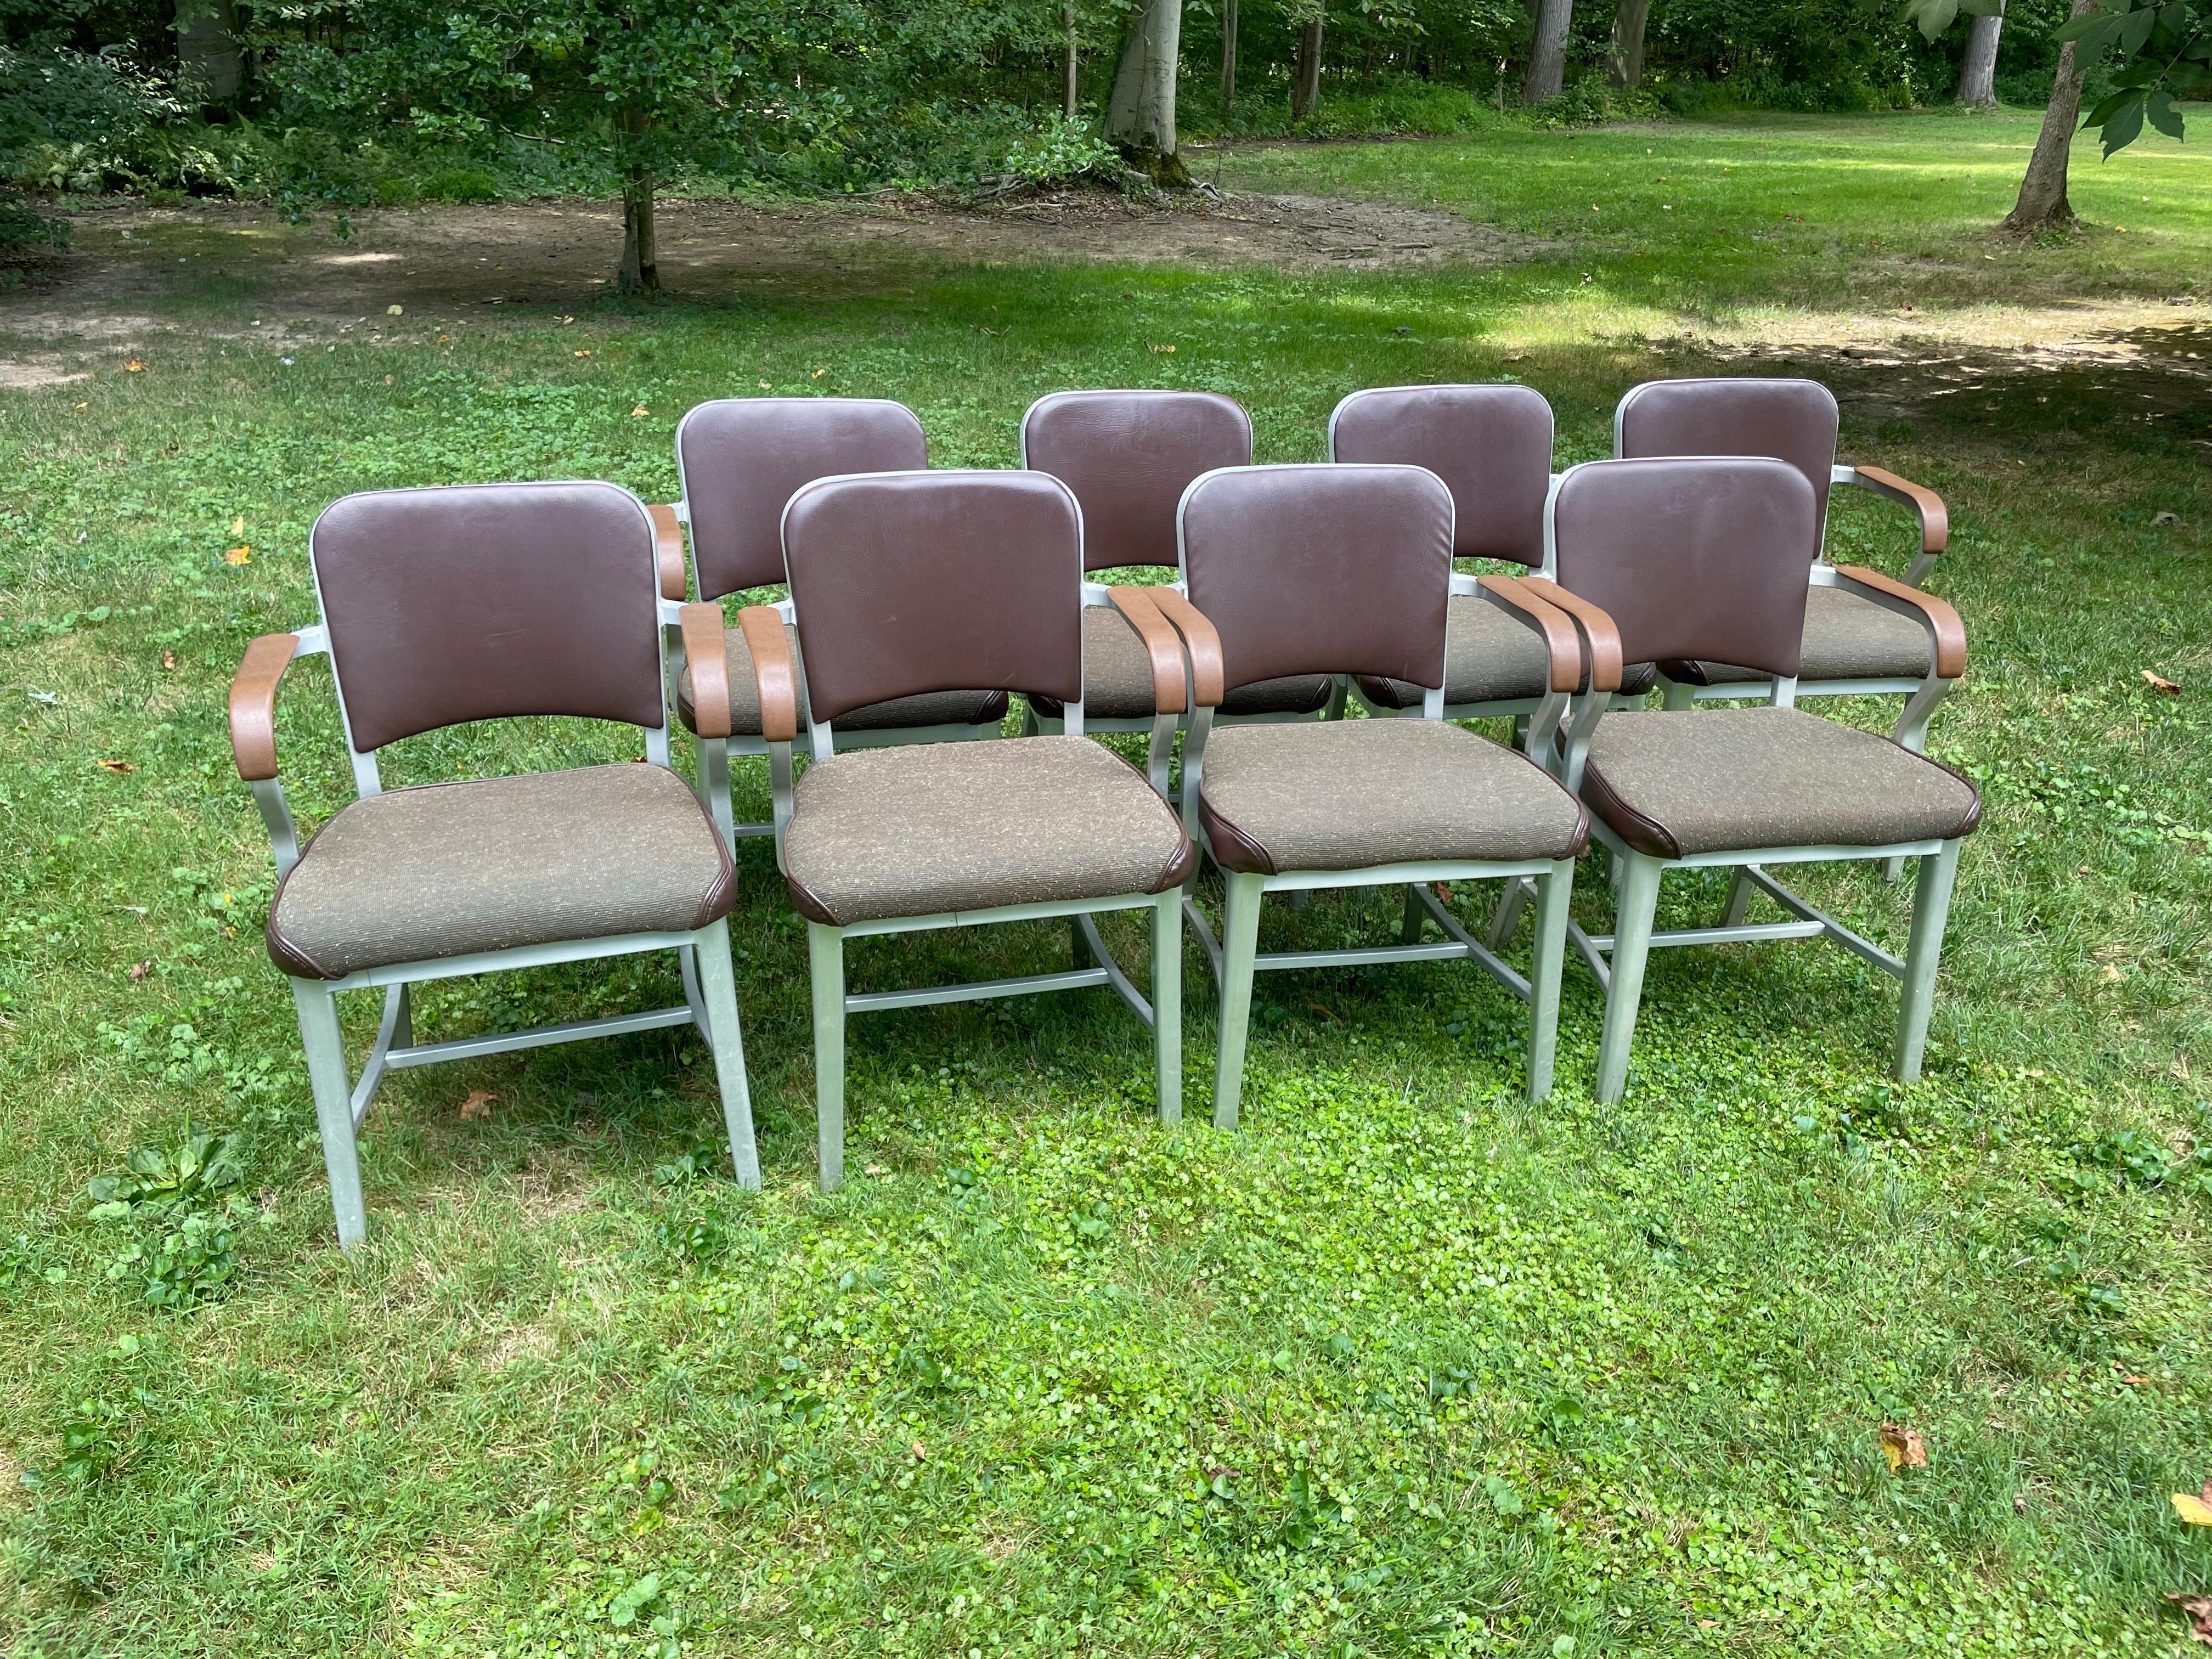 FANTASTIC set of eight vintage Emeco aluminum chairs. Upholstered seats and backs, plastic arm caps. Emeco mark (see photo). Salvaged from a university, these chairs have previously been reupholstered and could go right into service as-is or easily